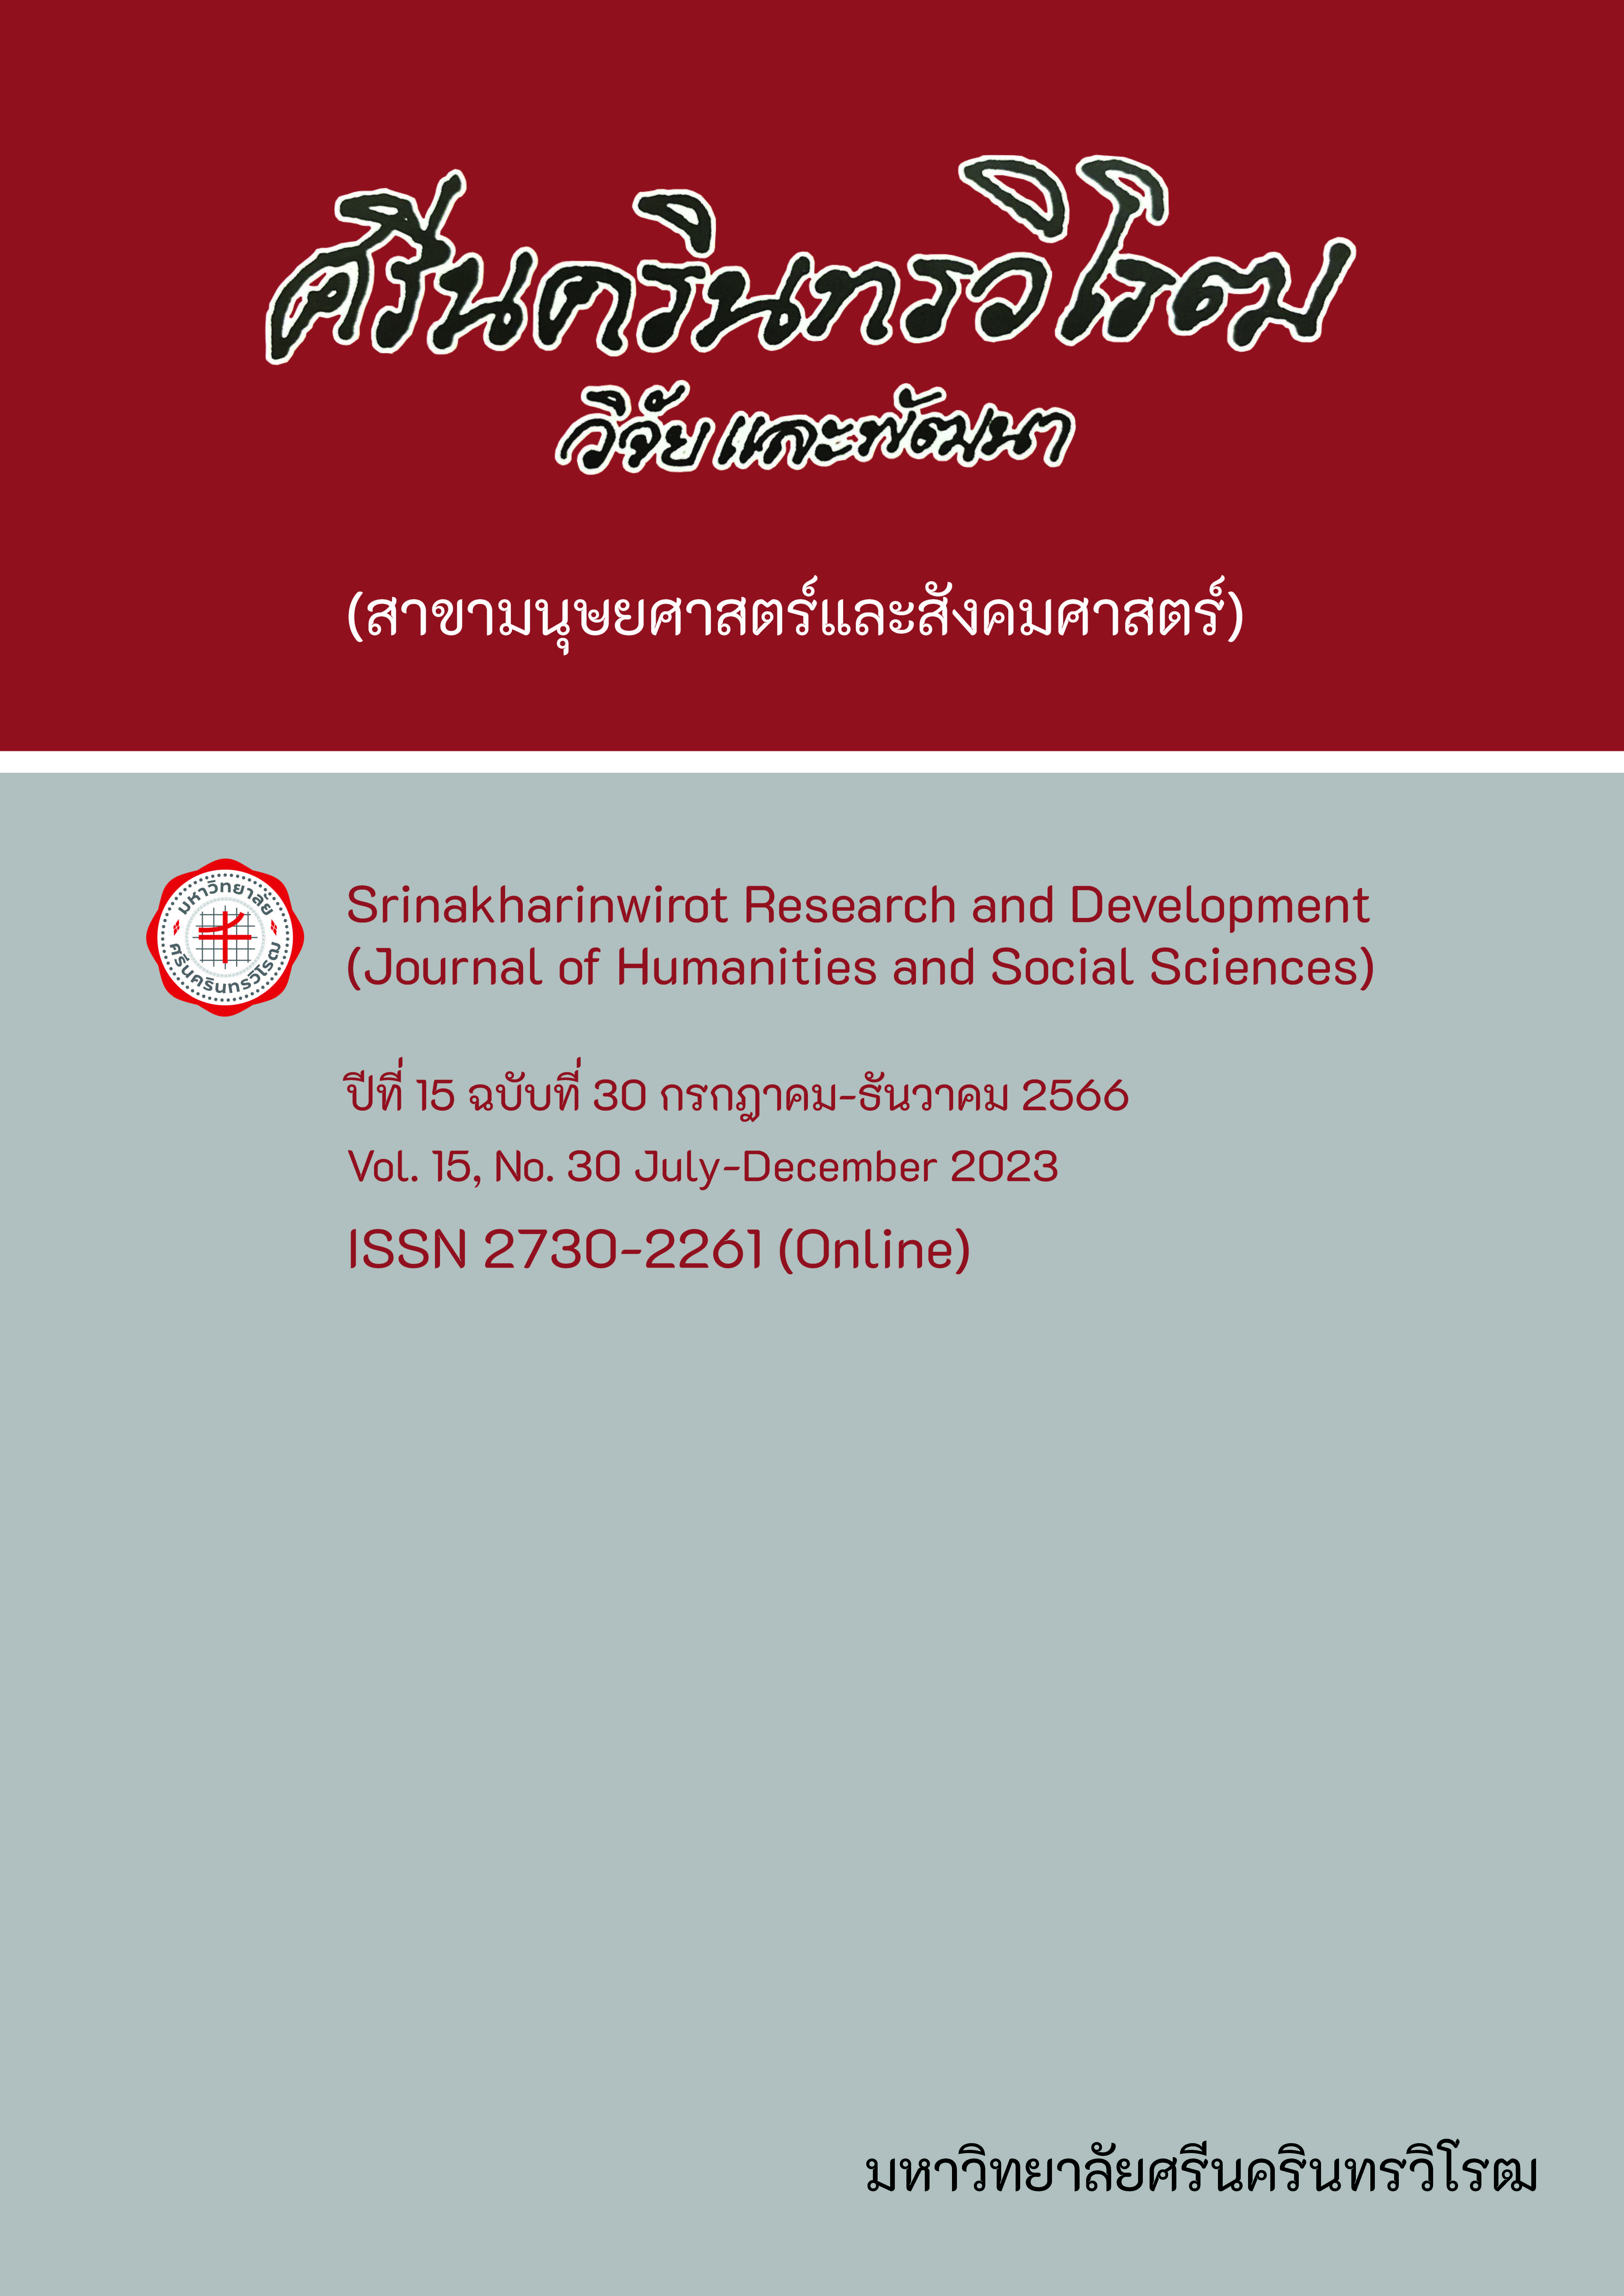 					View Vol. 15 No. 30, July-December (2023): Srinakharinwirot Research and Development (Journal of Humanities and Social Sciences)
				